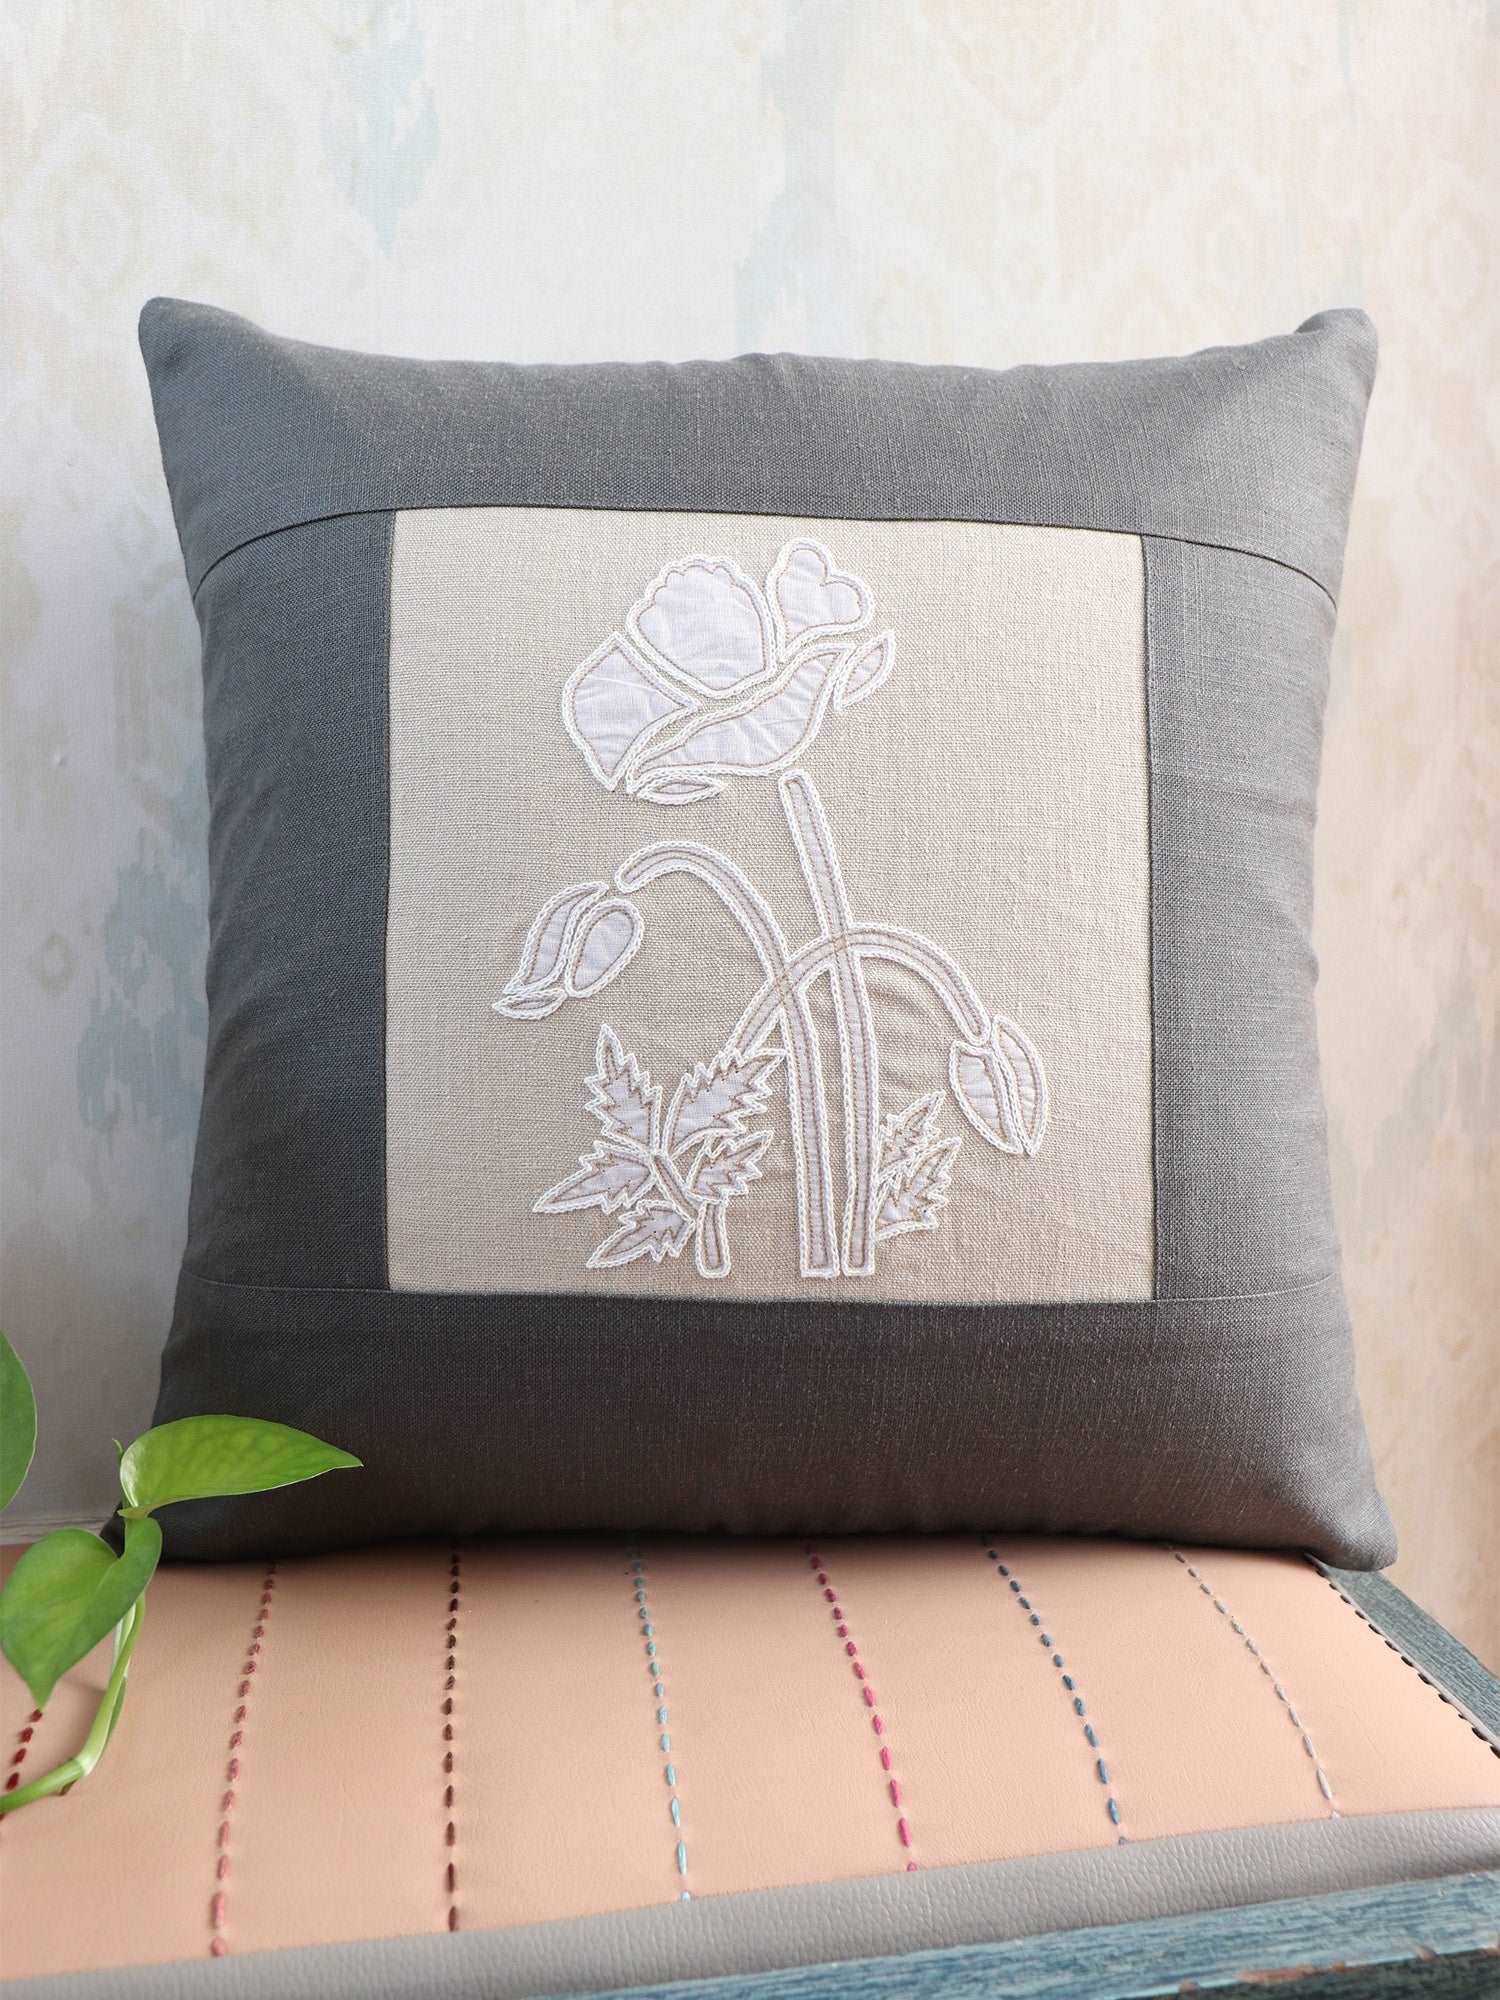 Cushion Cover Cotton Floral Patchwork, Applique and Hand Embroidery  Dark Grey - 16inches X 16inches